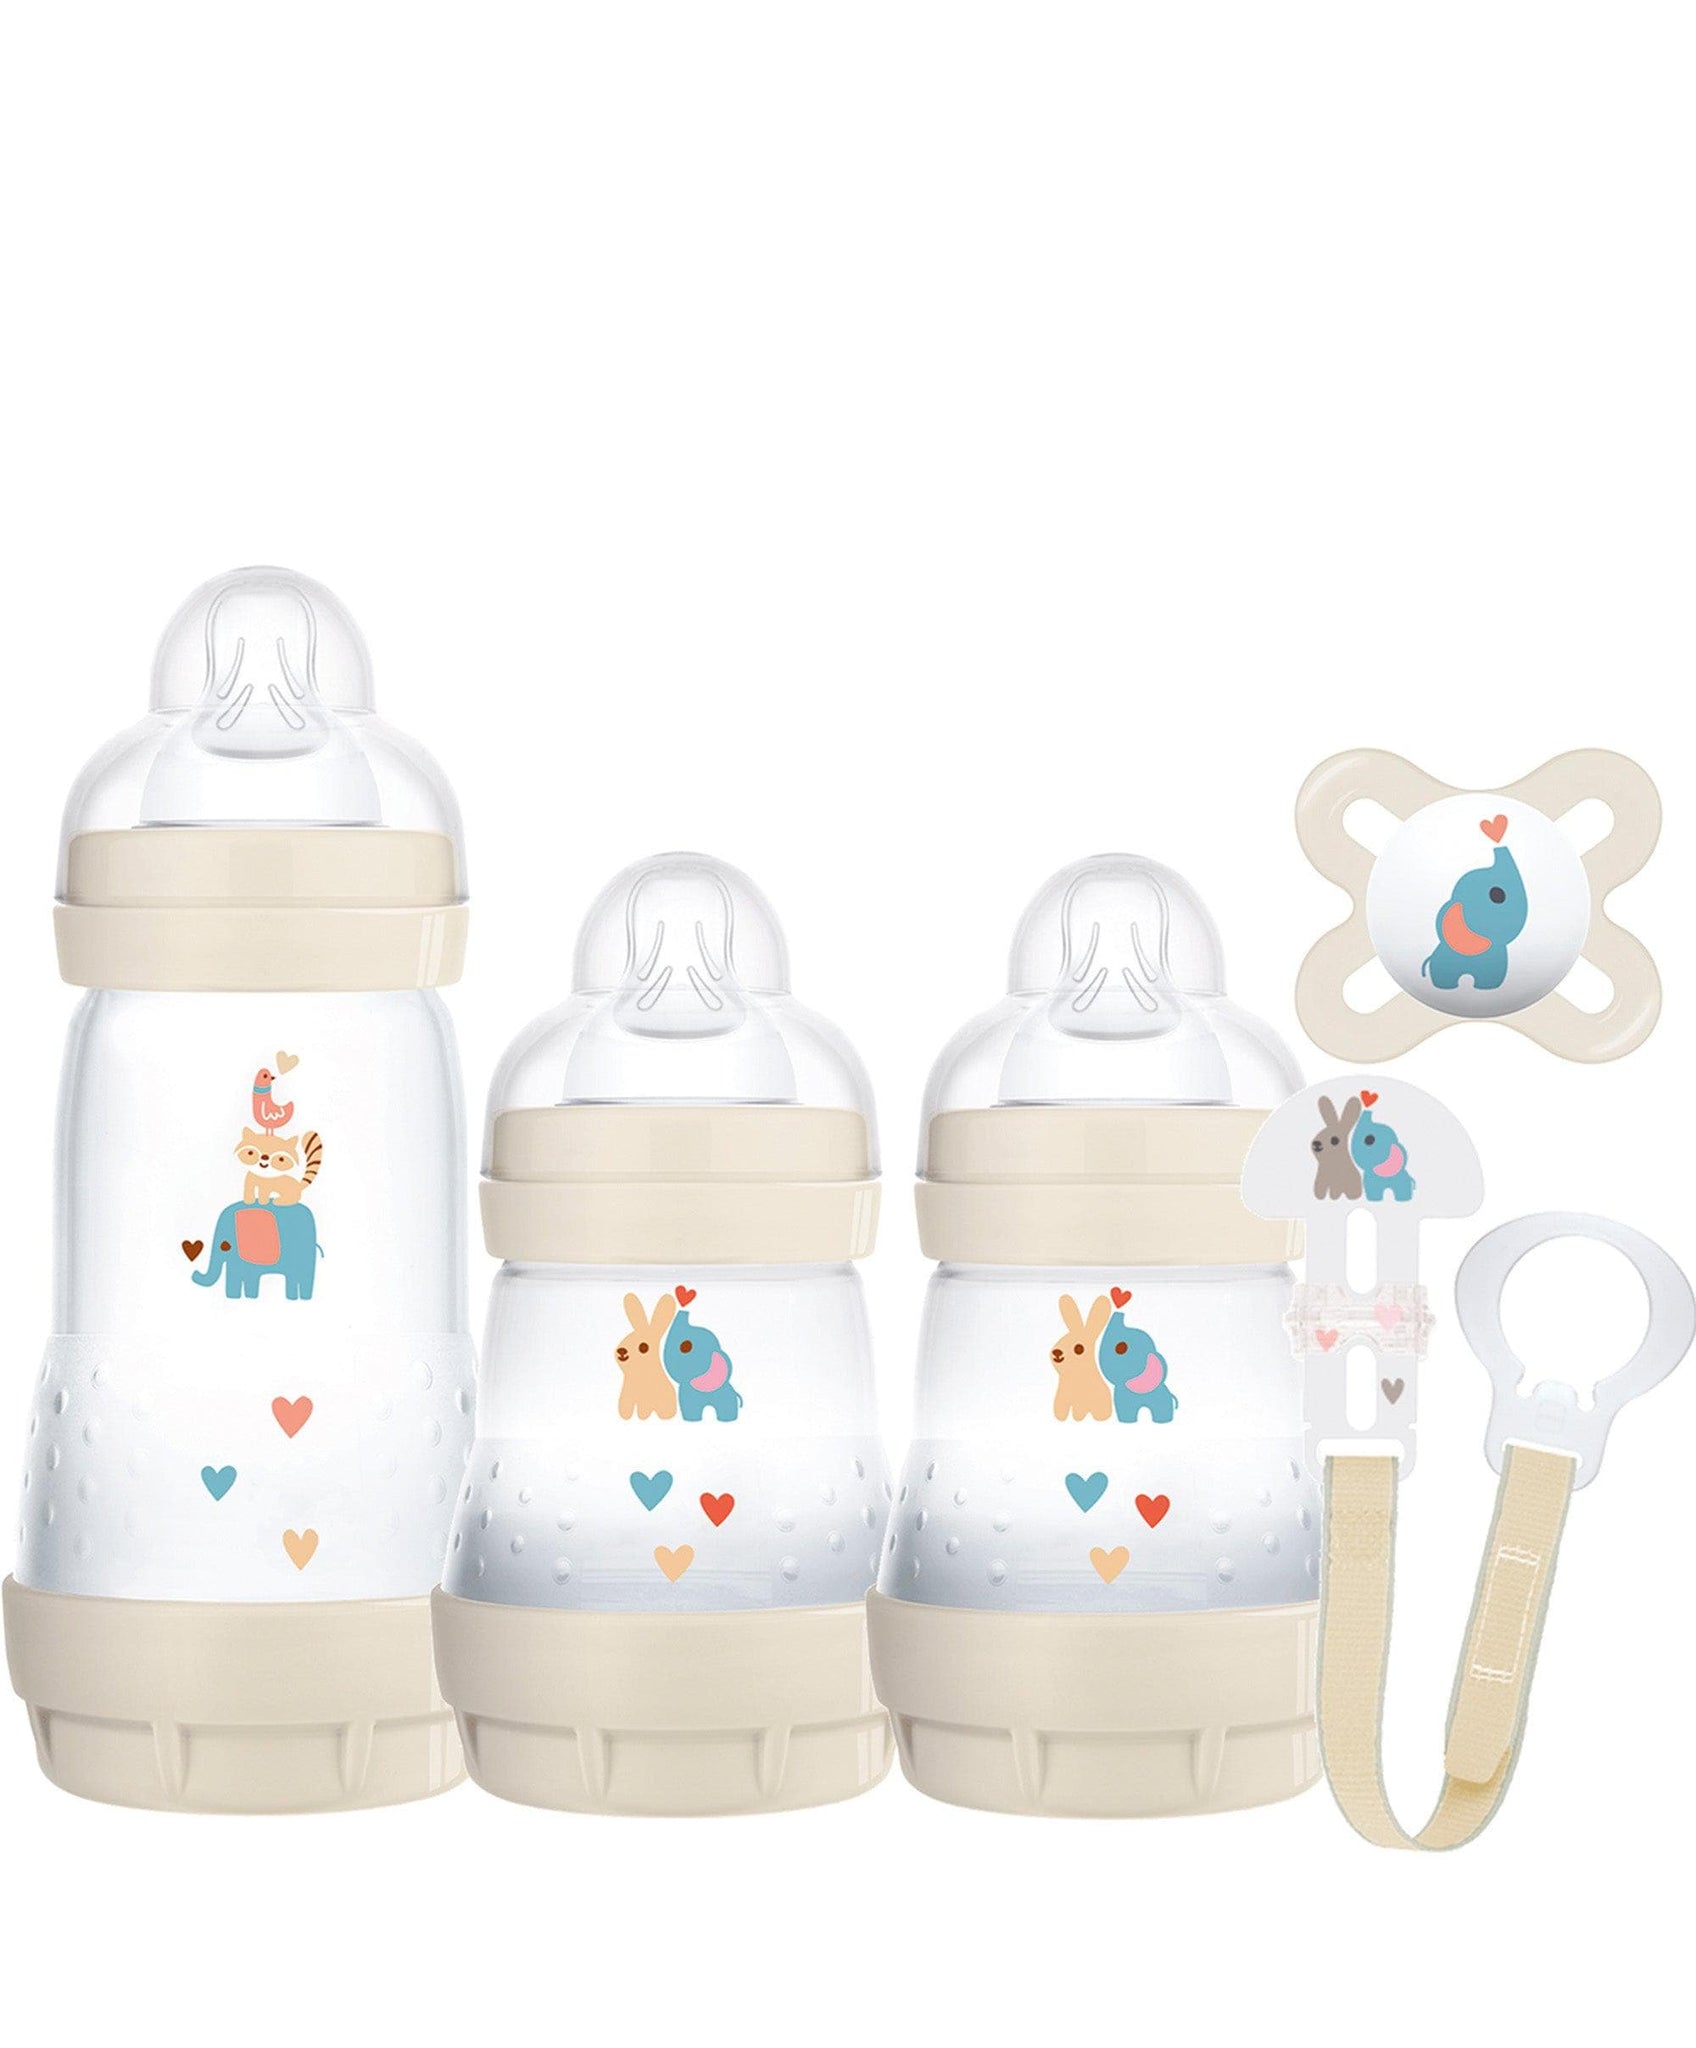 Easy Start™ Anti-Colic 160ml Better Together